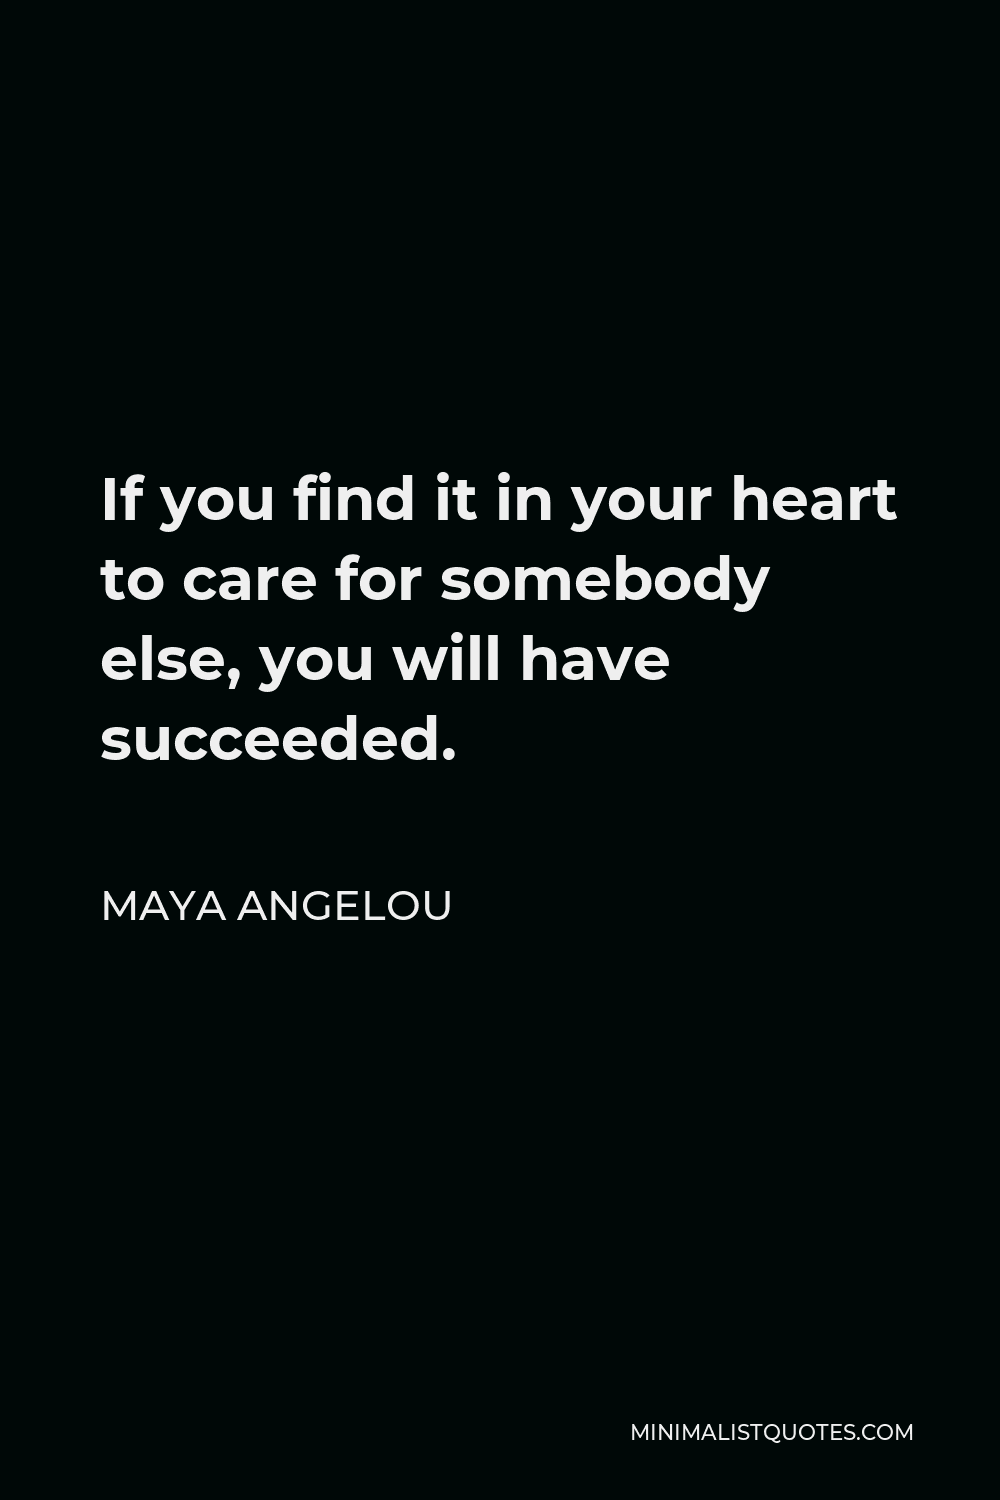 Maya Angelou Quote: When someone shows you who they are believe them ...